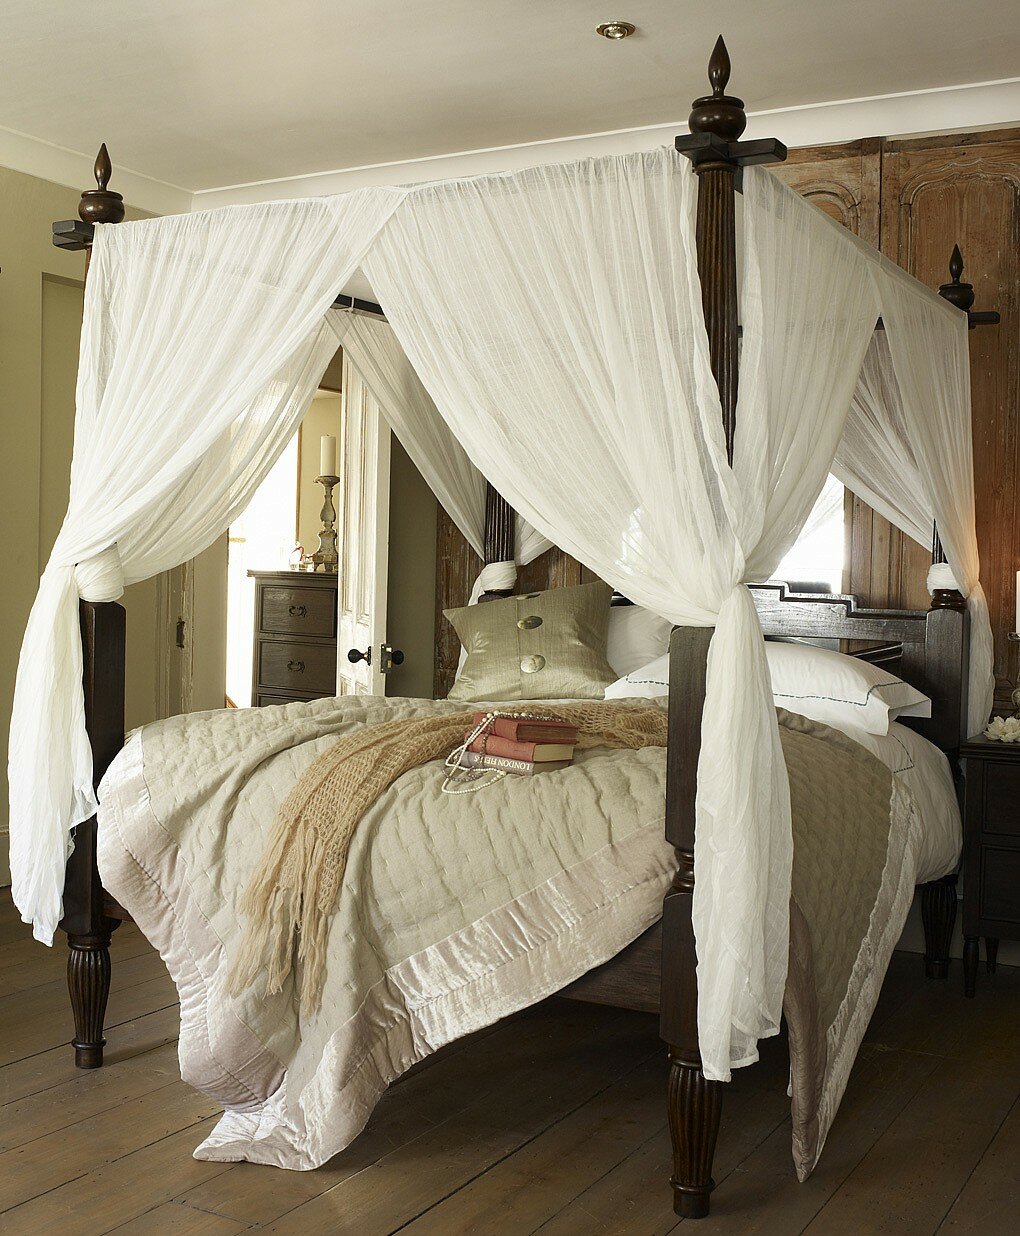 Charming Canopy Bed Curtains for Bedroom Furniture Decor Ideas: Buy Canopy Bed Curtains | Drapes For Four Poster Bed | Canopy Bed Curtains